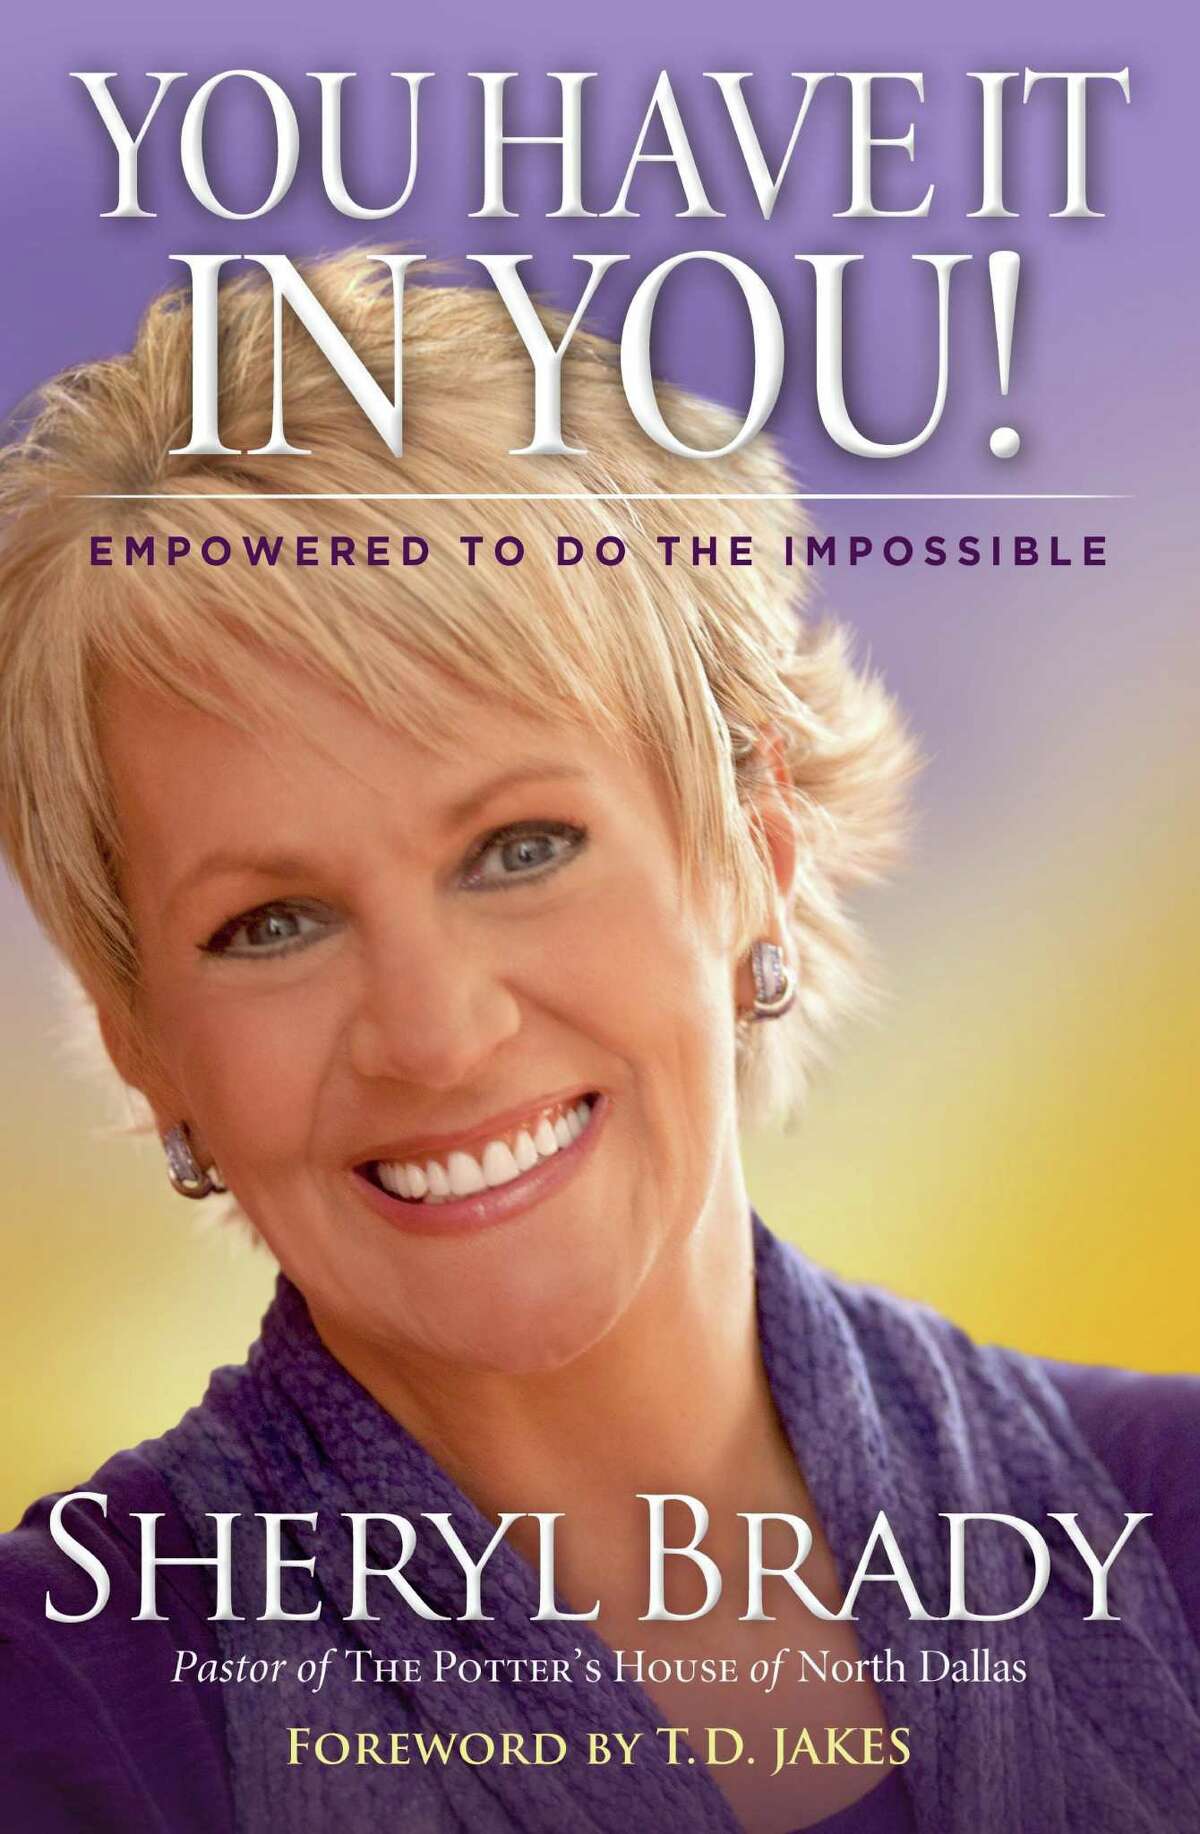 Sheryl Brady is the author of "You Have It In You!"